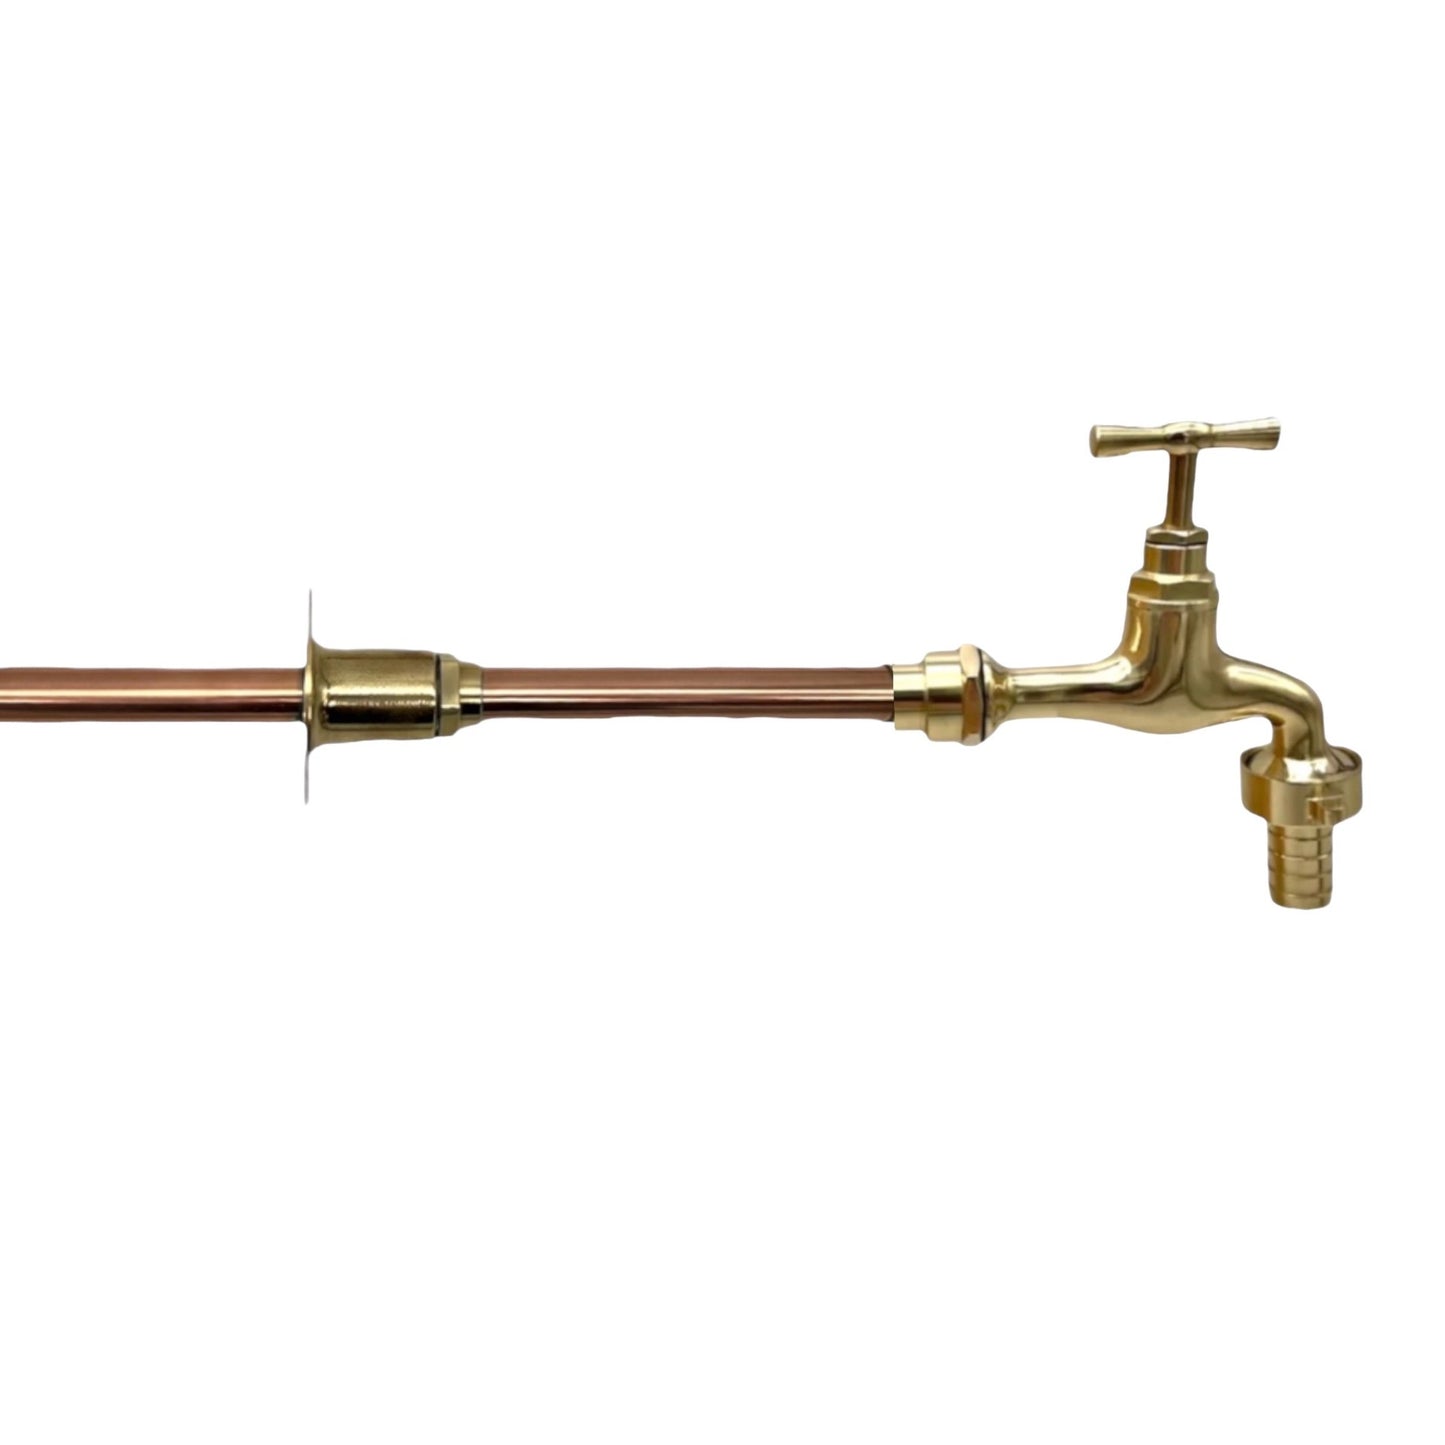 Handmade copper and brass wall mounted taps sold by All Things French Store